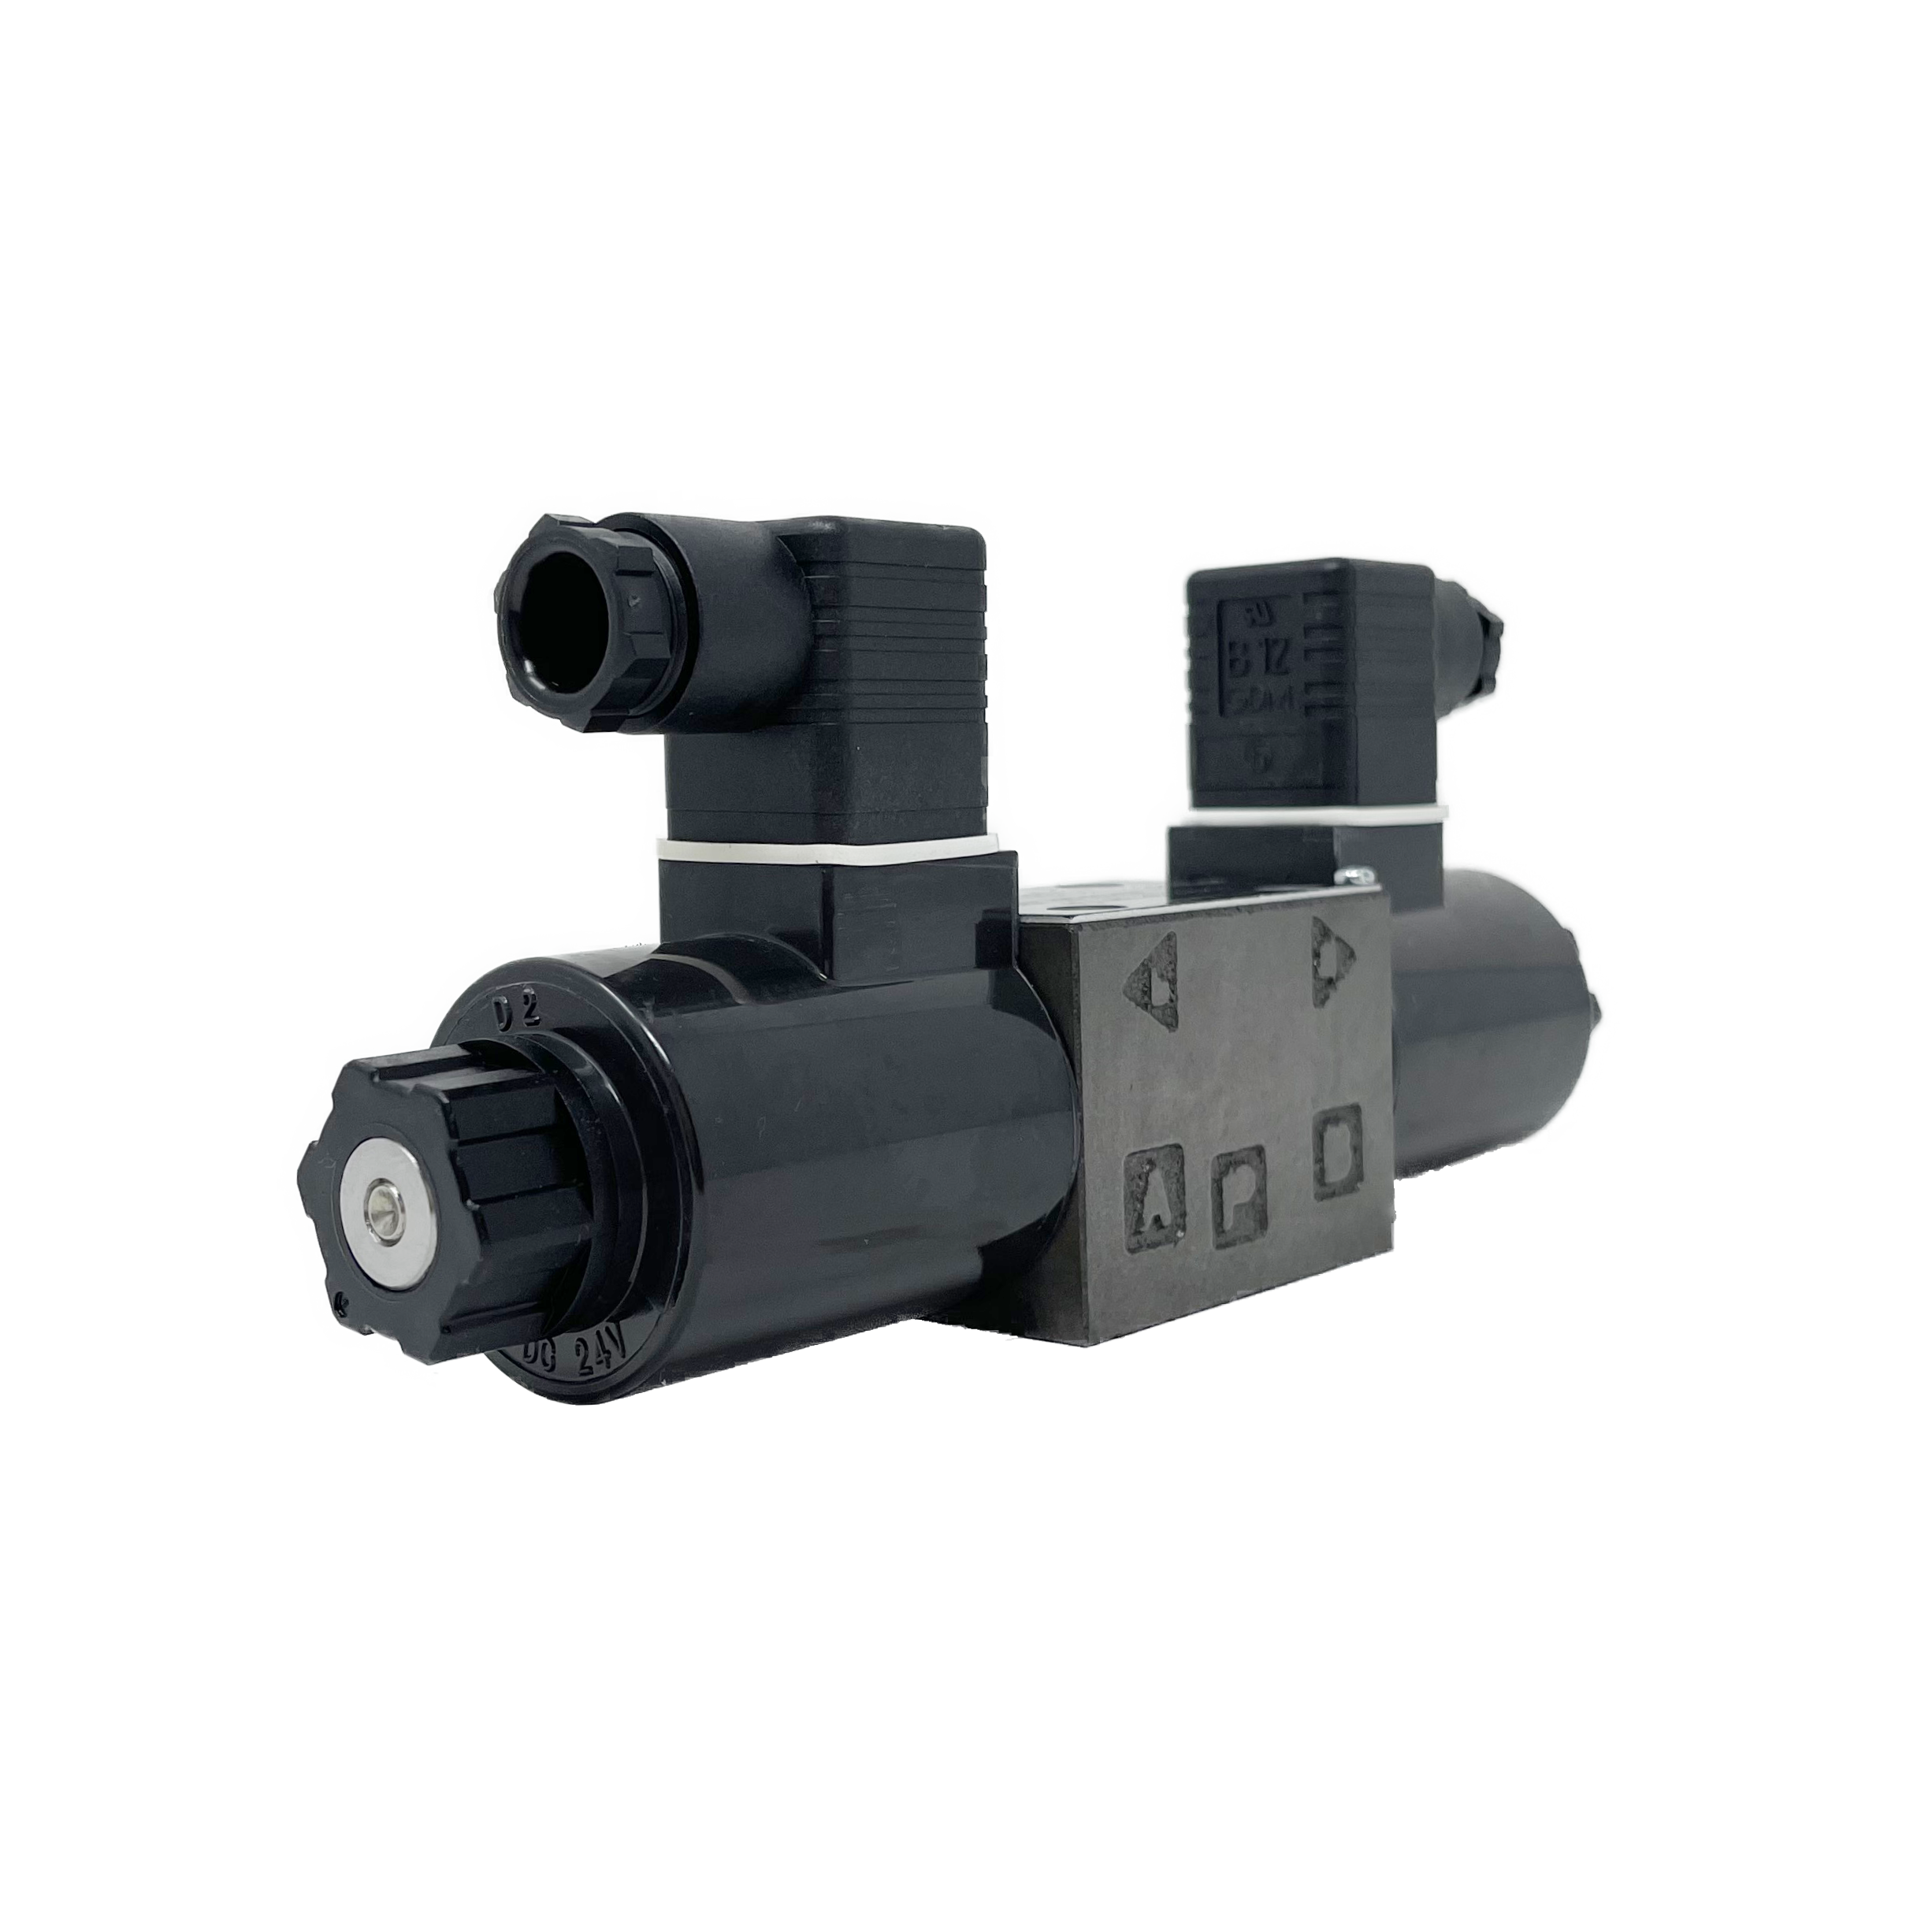 SA-G01-C4-D2-E31 : Nachi Solenoid Valve, 3P4W, D03 (NG6), 13.2GPM, 5075psi, All Ports Open Neutral, 24 VDC, DIN